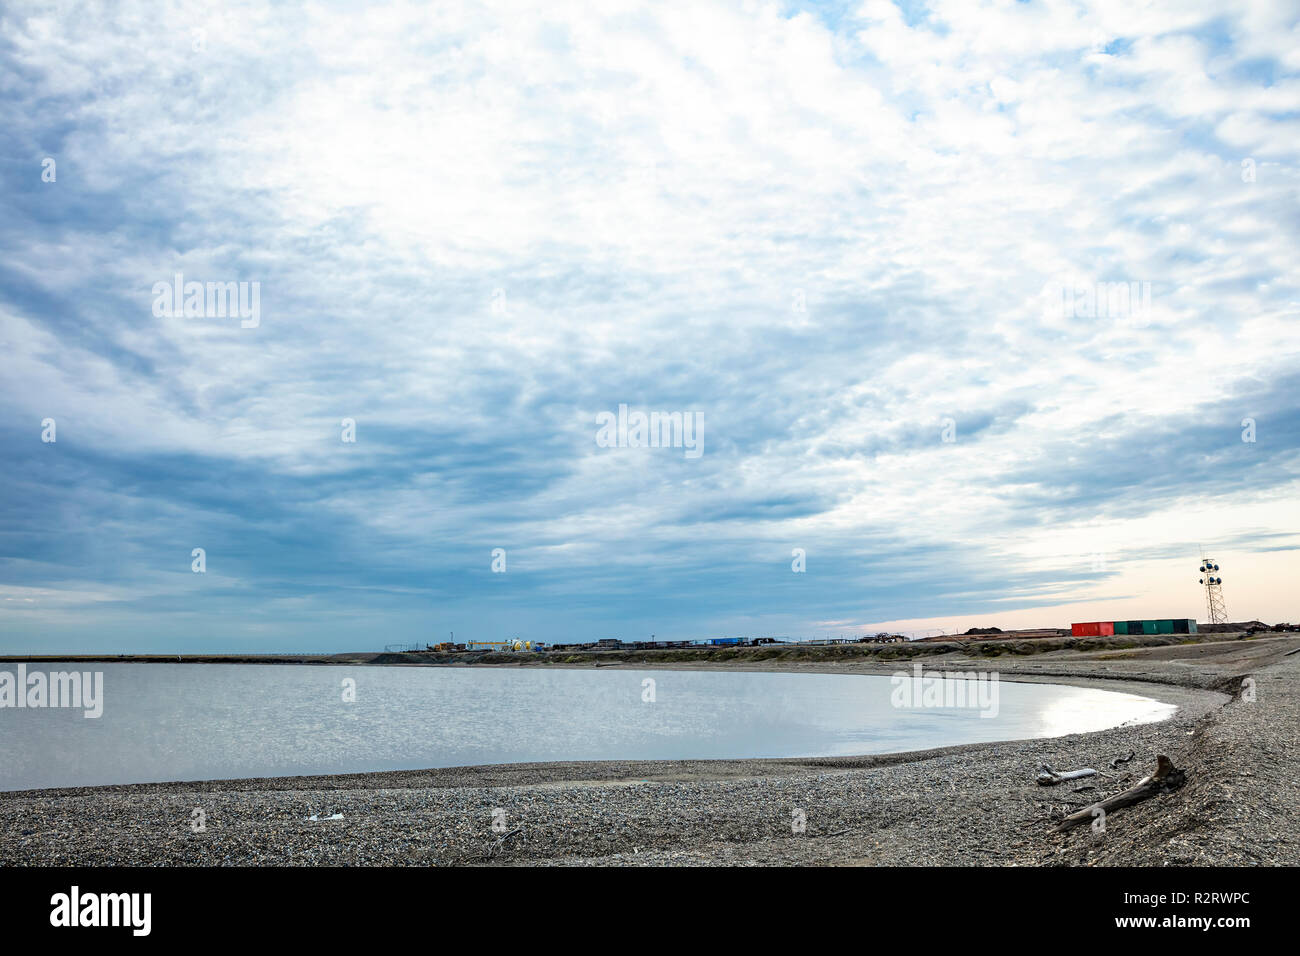 A view of the Arctic Ocean at Prudhoe Bay in Alaska, USA Stock Photo